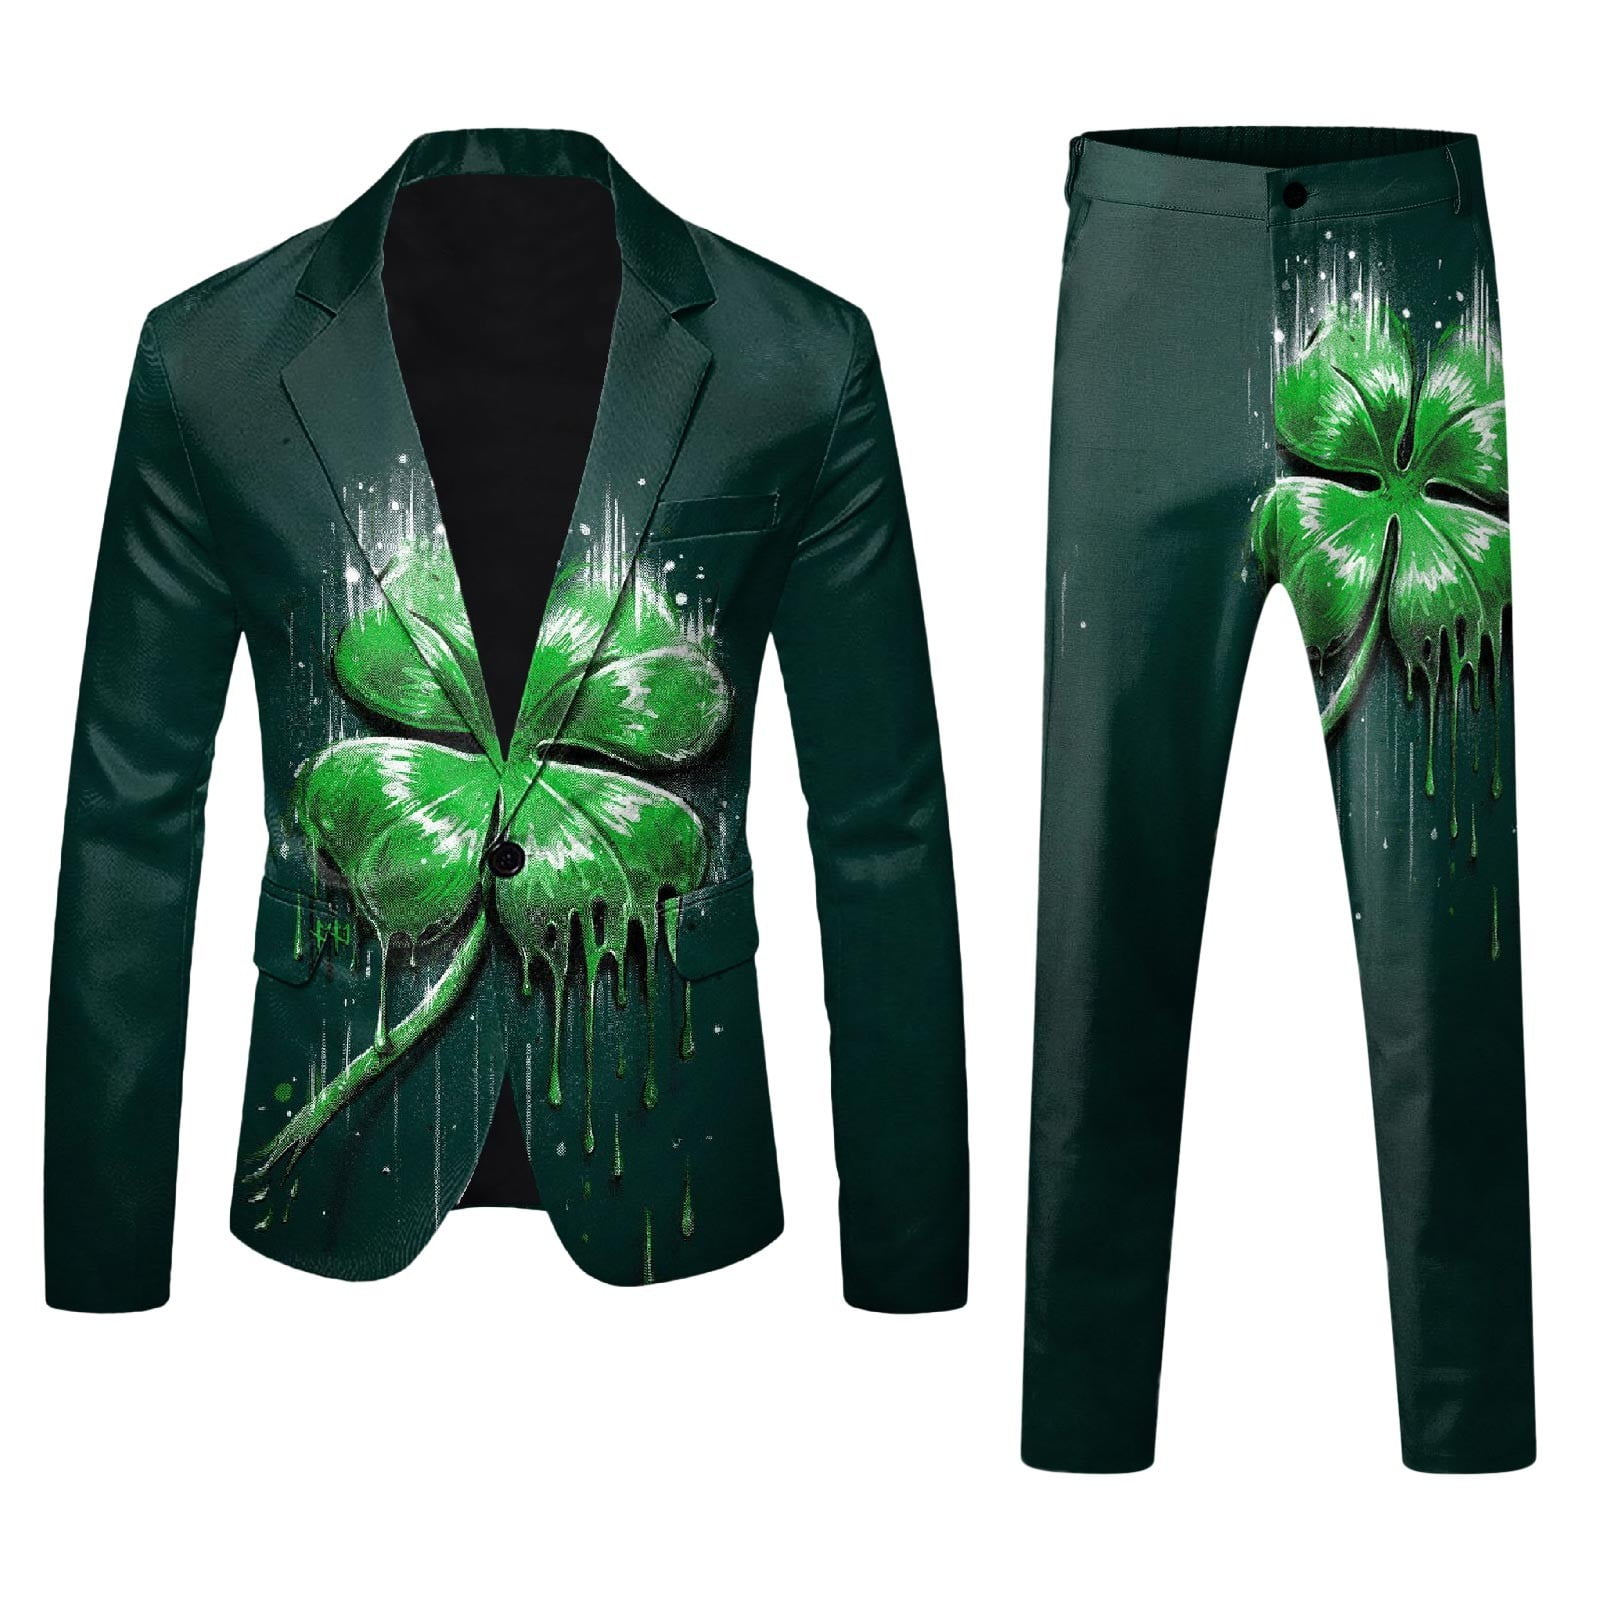 AdBFJAF Summer Male 80 S Outfits for Men Mens St. Pat's Day Printed ...